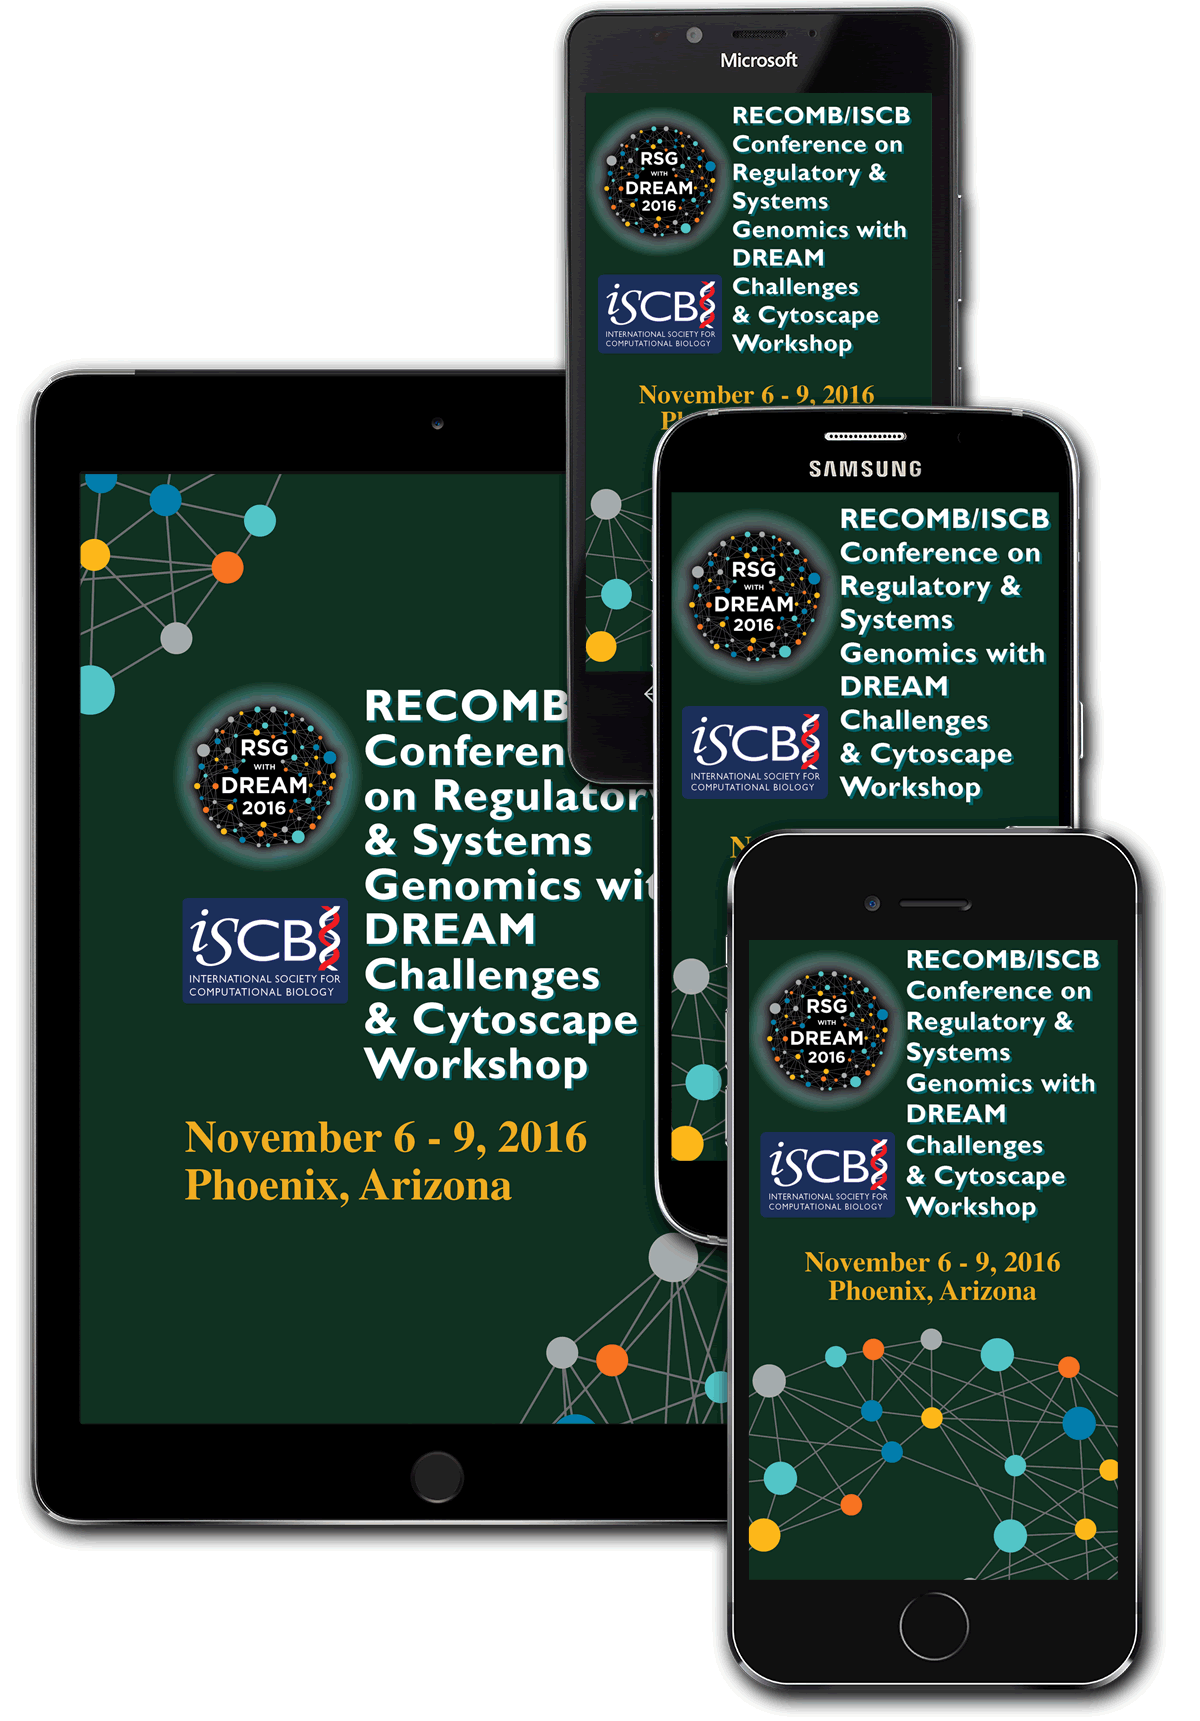 Download the RECOMB/ISCB RSG with Dream 2016 MOBILE APP!